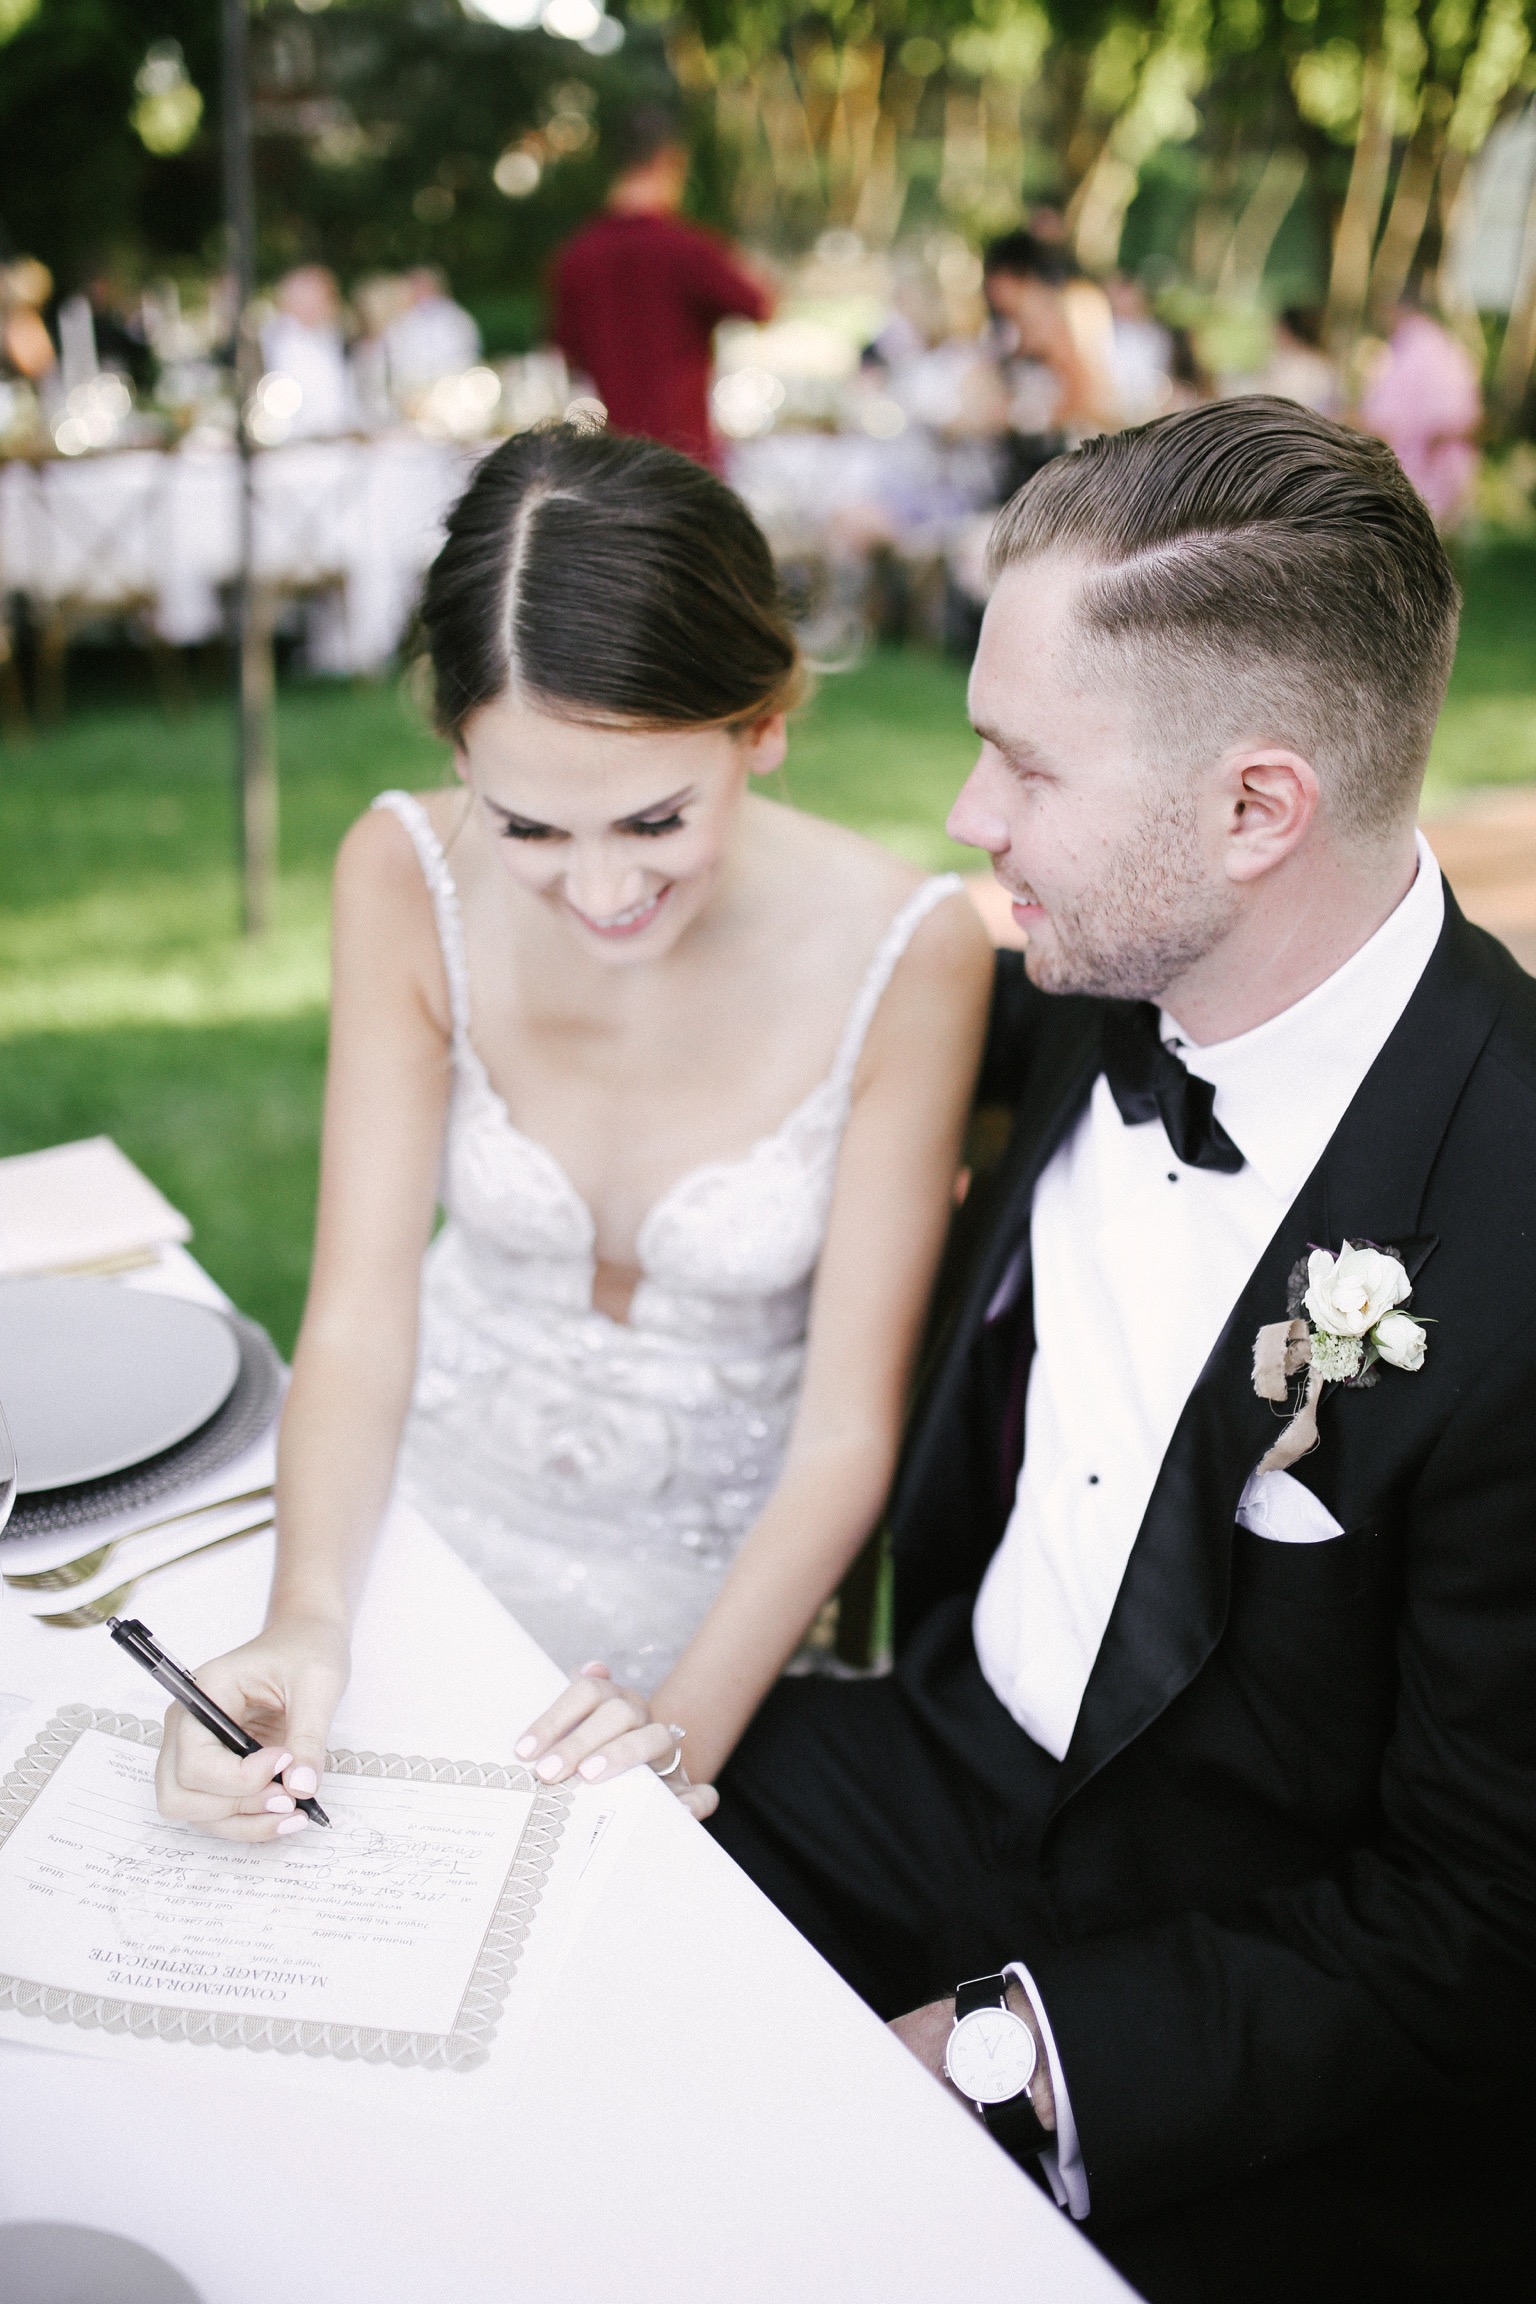 A bride and groom signing their wedding license.